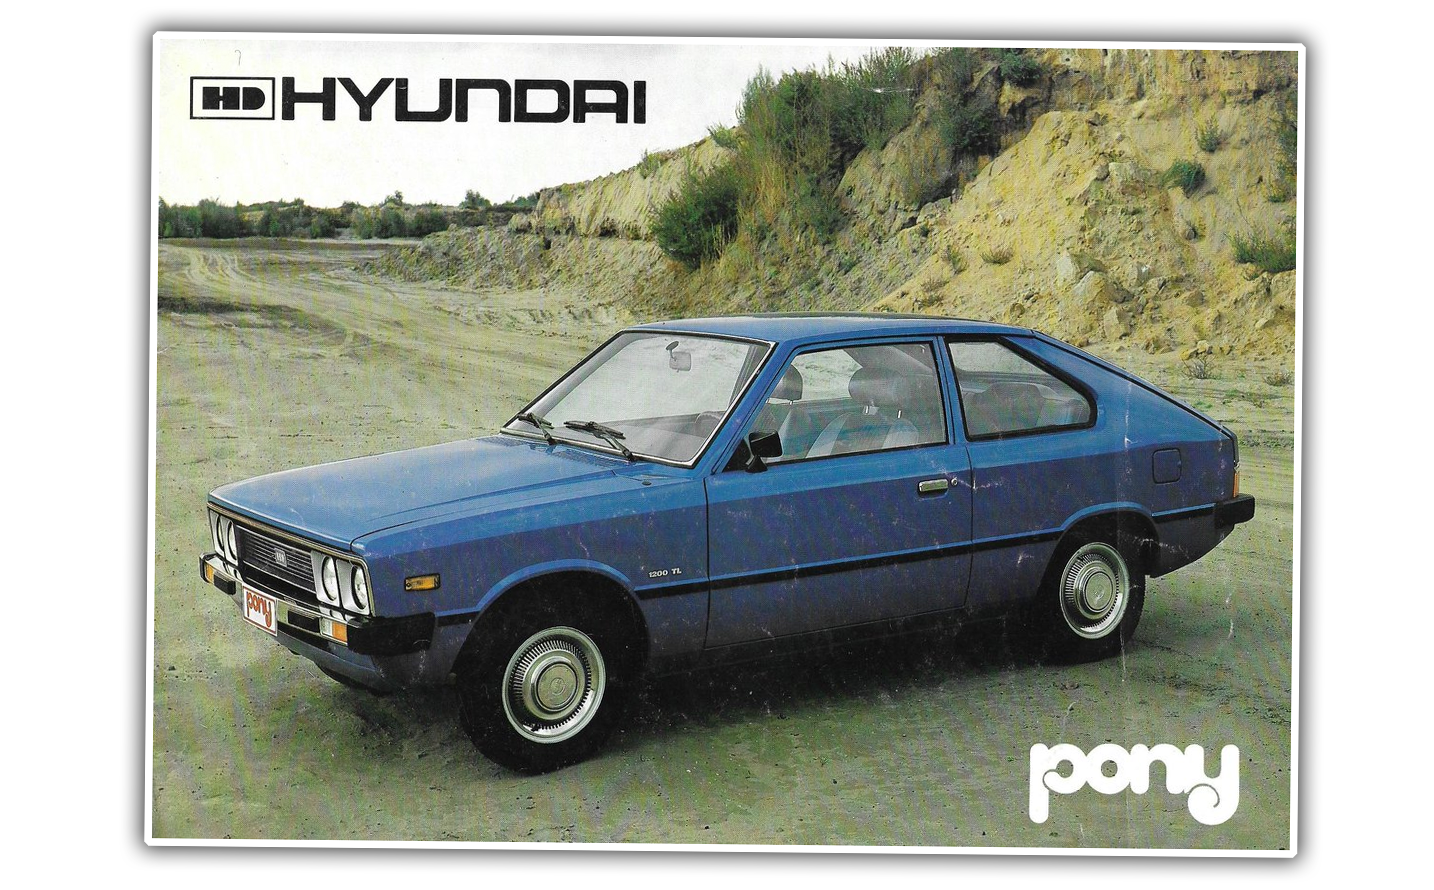 Hyundai Surprised Everyone With A Shockingly Cool EV Conversion Of An Old Hyundai Pony